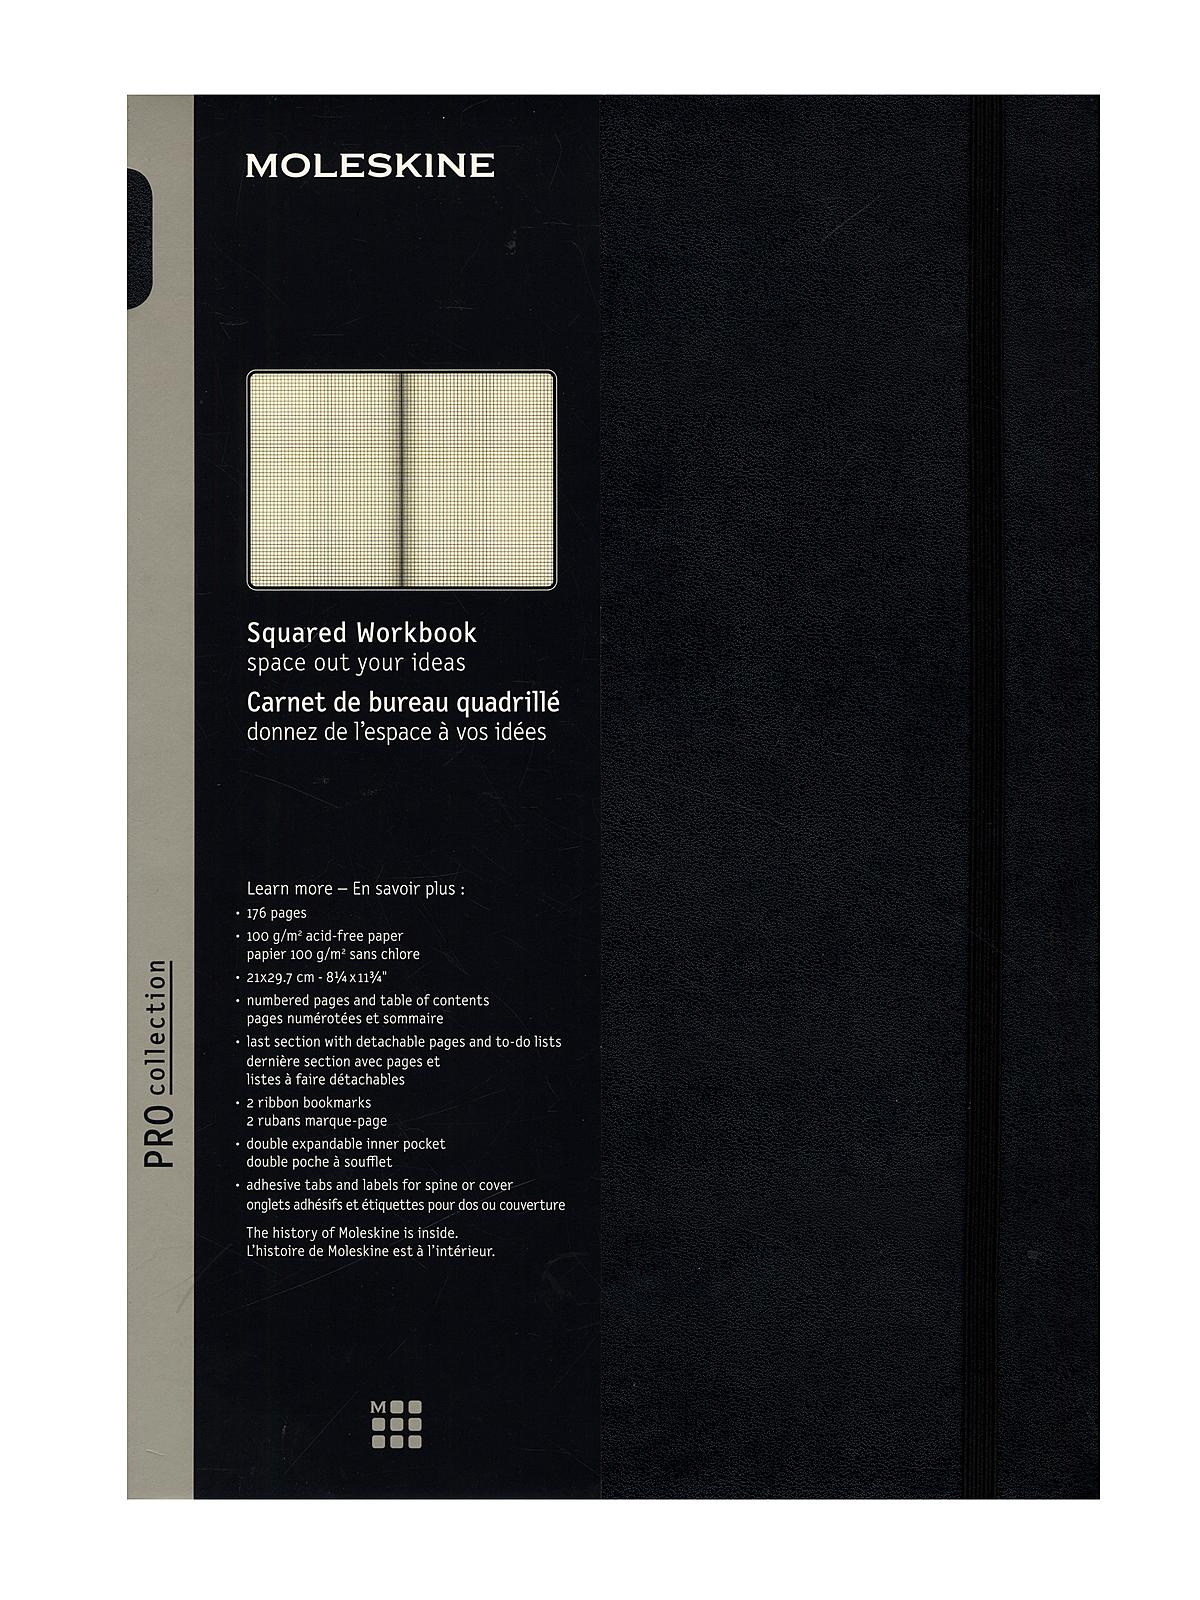 Pro Collection Workbook Black Hardcover 176 Pages, Squared